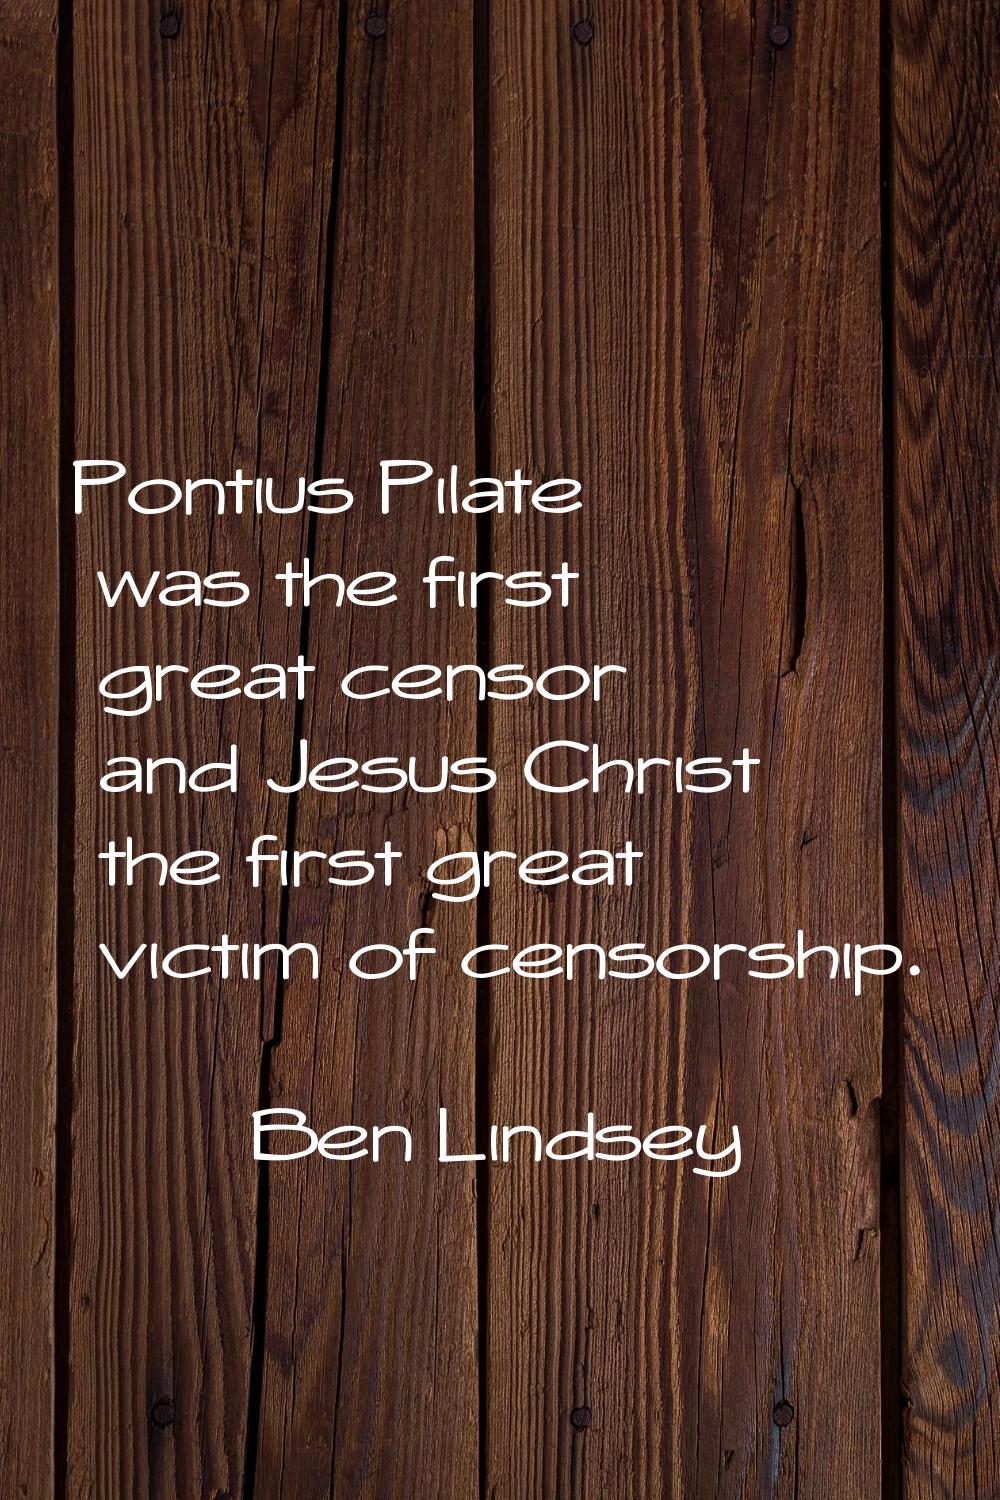 Pontius Pilate was the first great censor and Jesus Christ the first great victim of censorship.